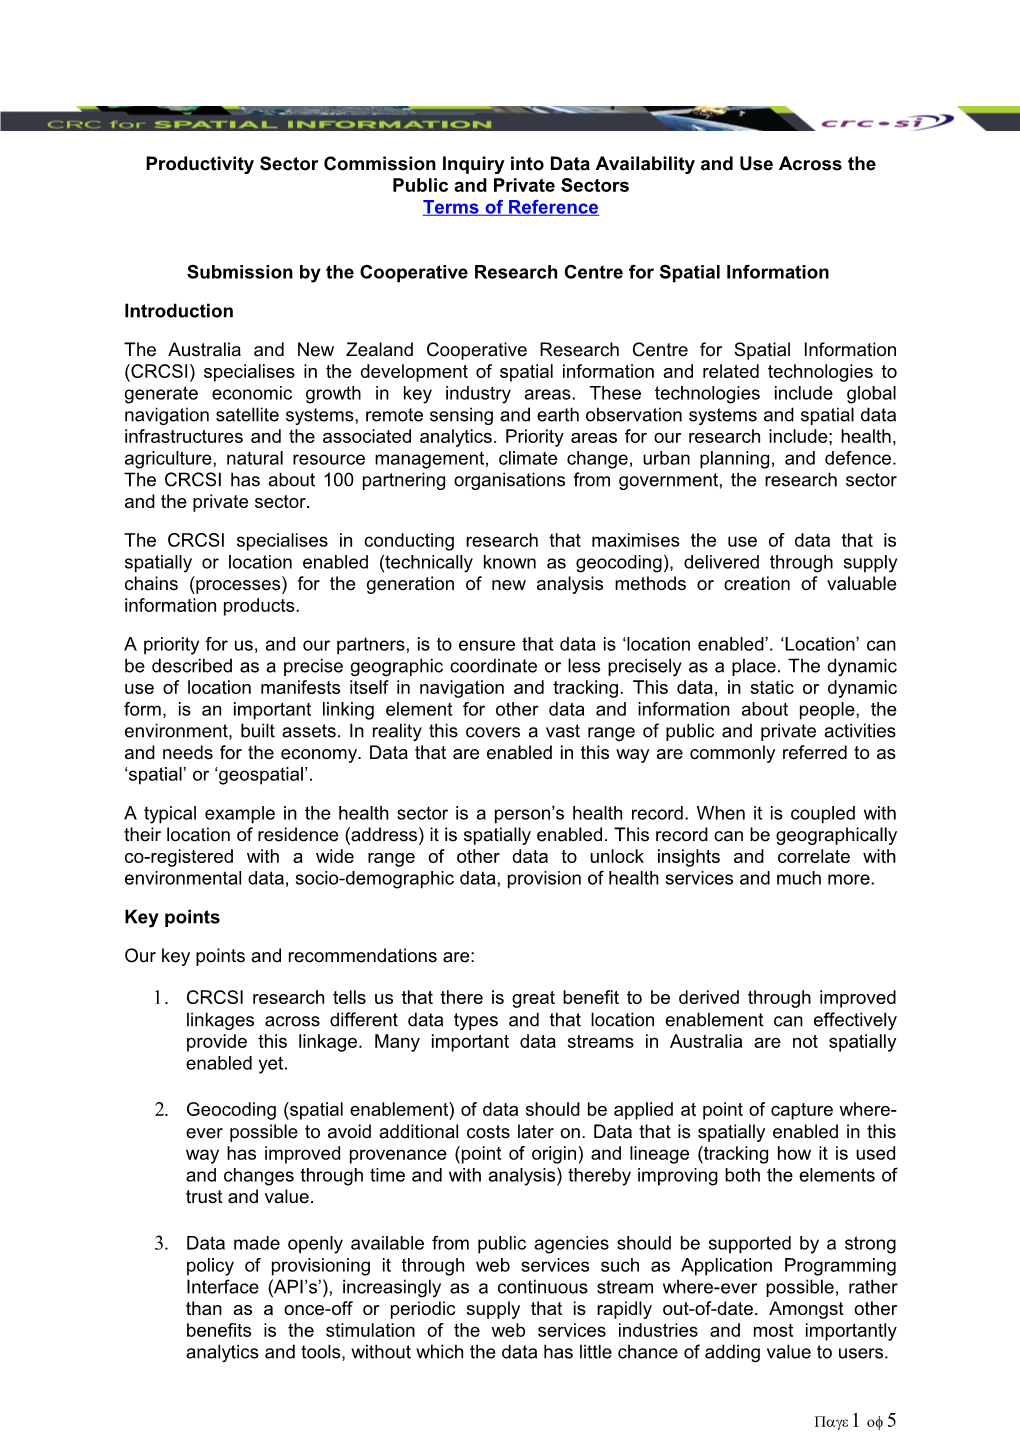 Submission 43 - Cooperative Research Centre for Spatial Information (CRCSI) - Data Availability